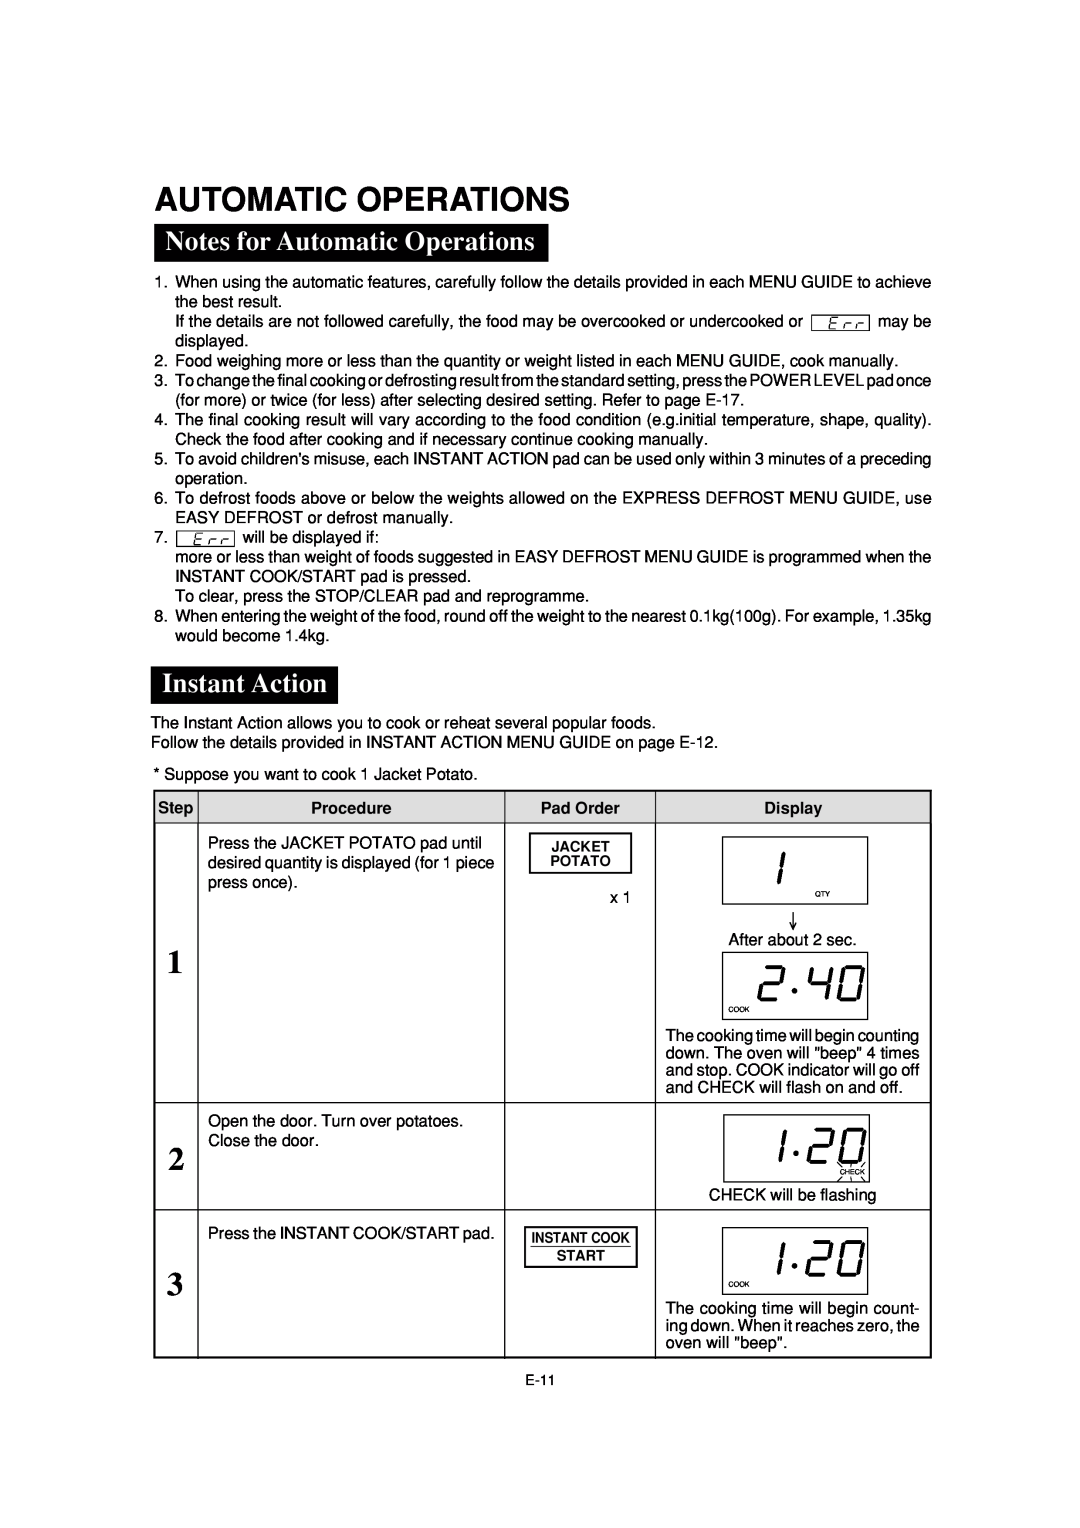 Sharp R-231F operation manual Notes for Automatic Operations, Instant Action 